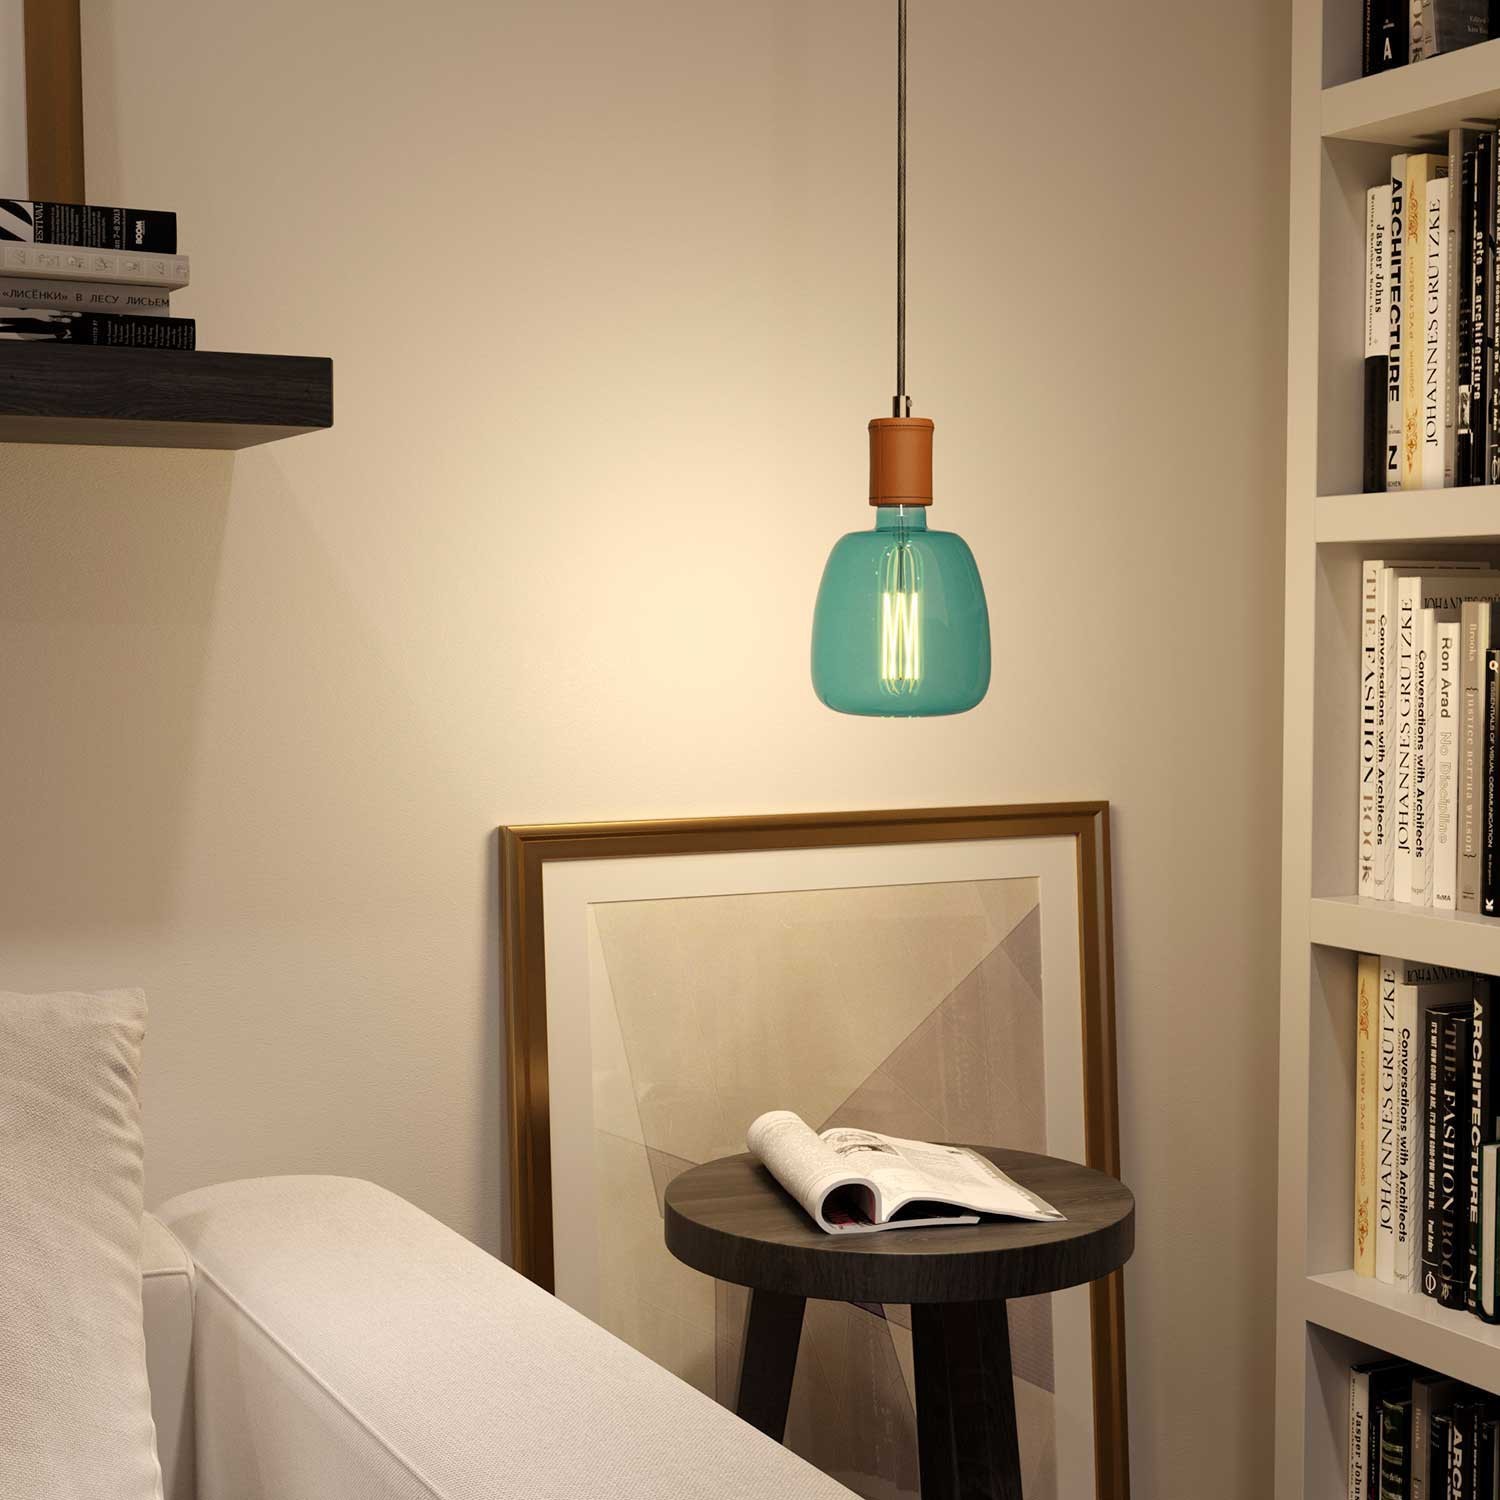 Pendant lamp with textile cable and leather details - Made in Italy